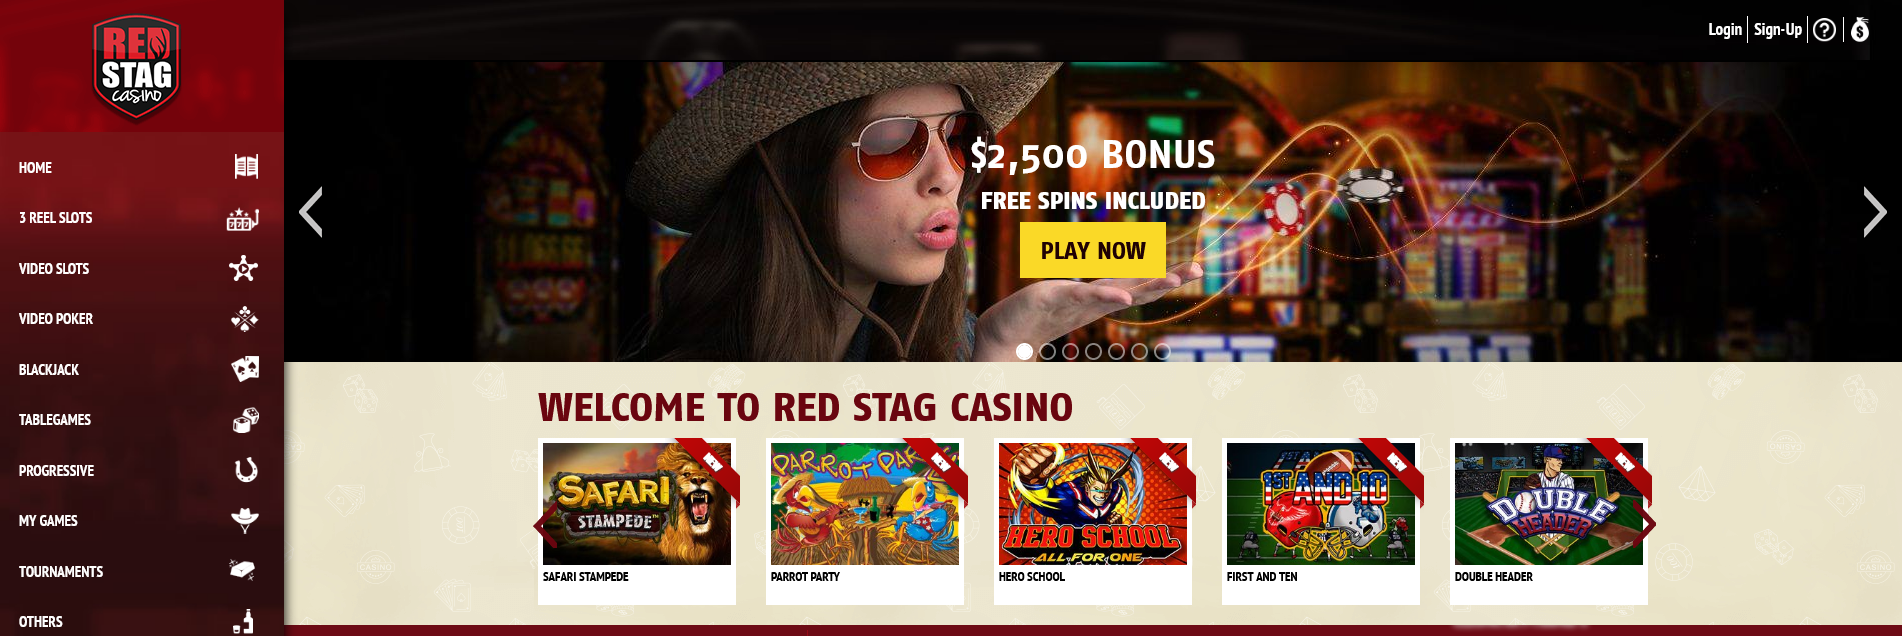 Red Stag USD-$2,500 BONUS FREE SPINS INCLUDED